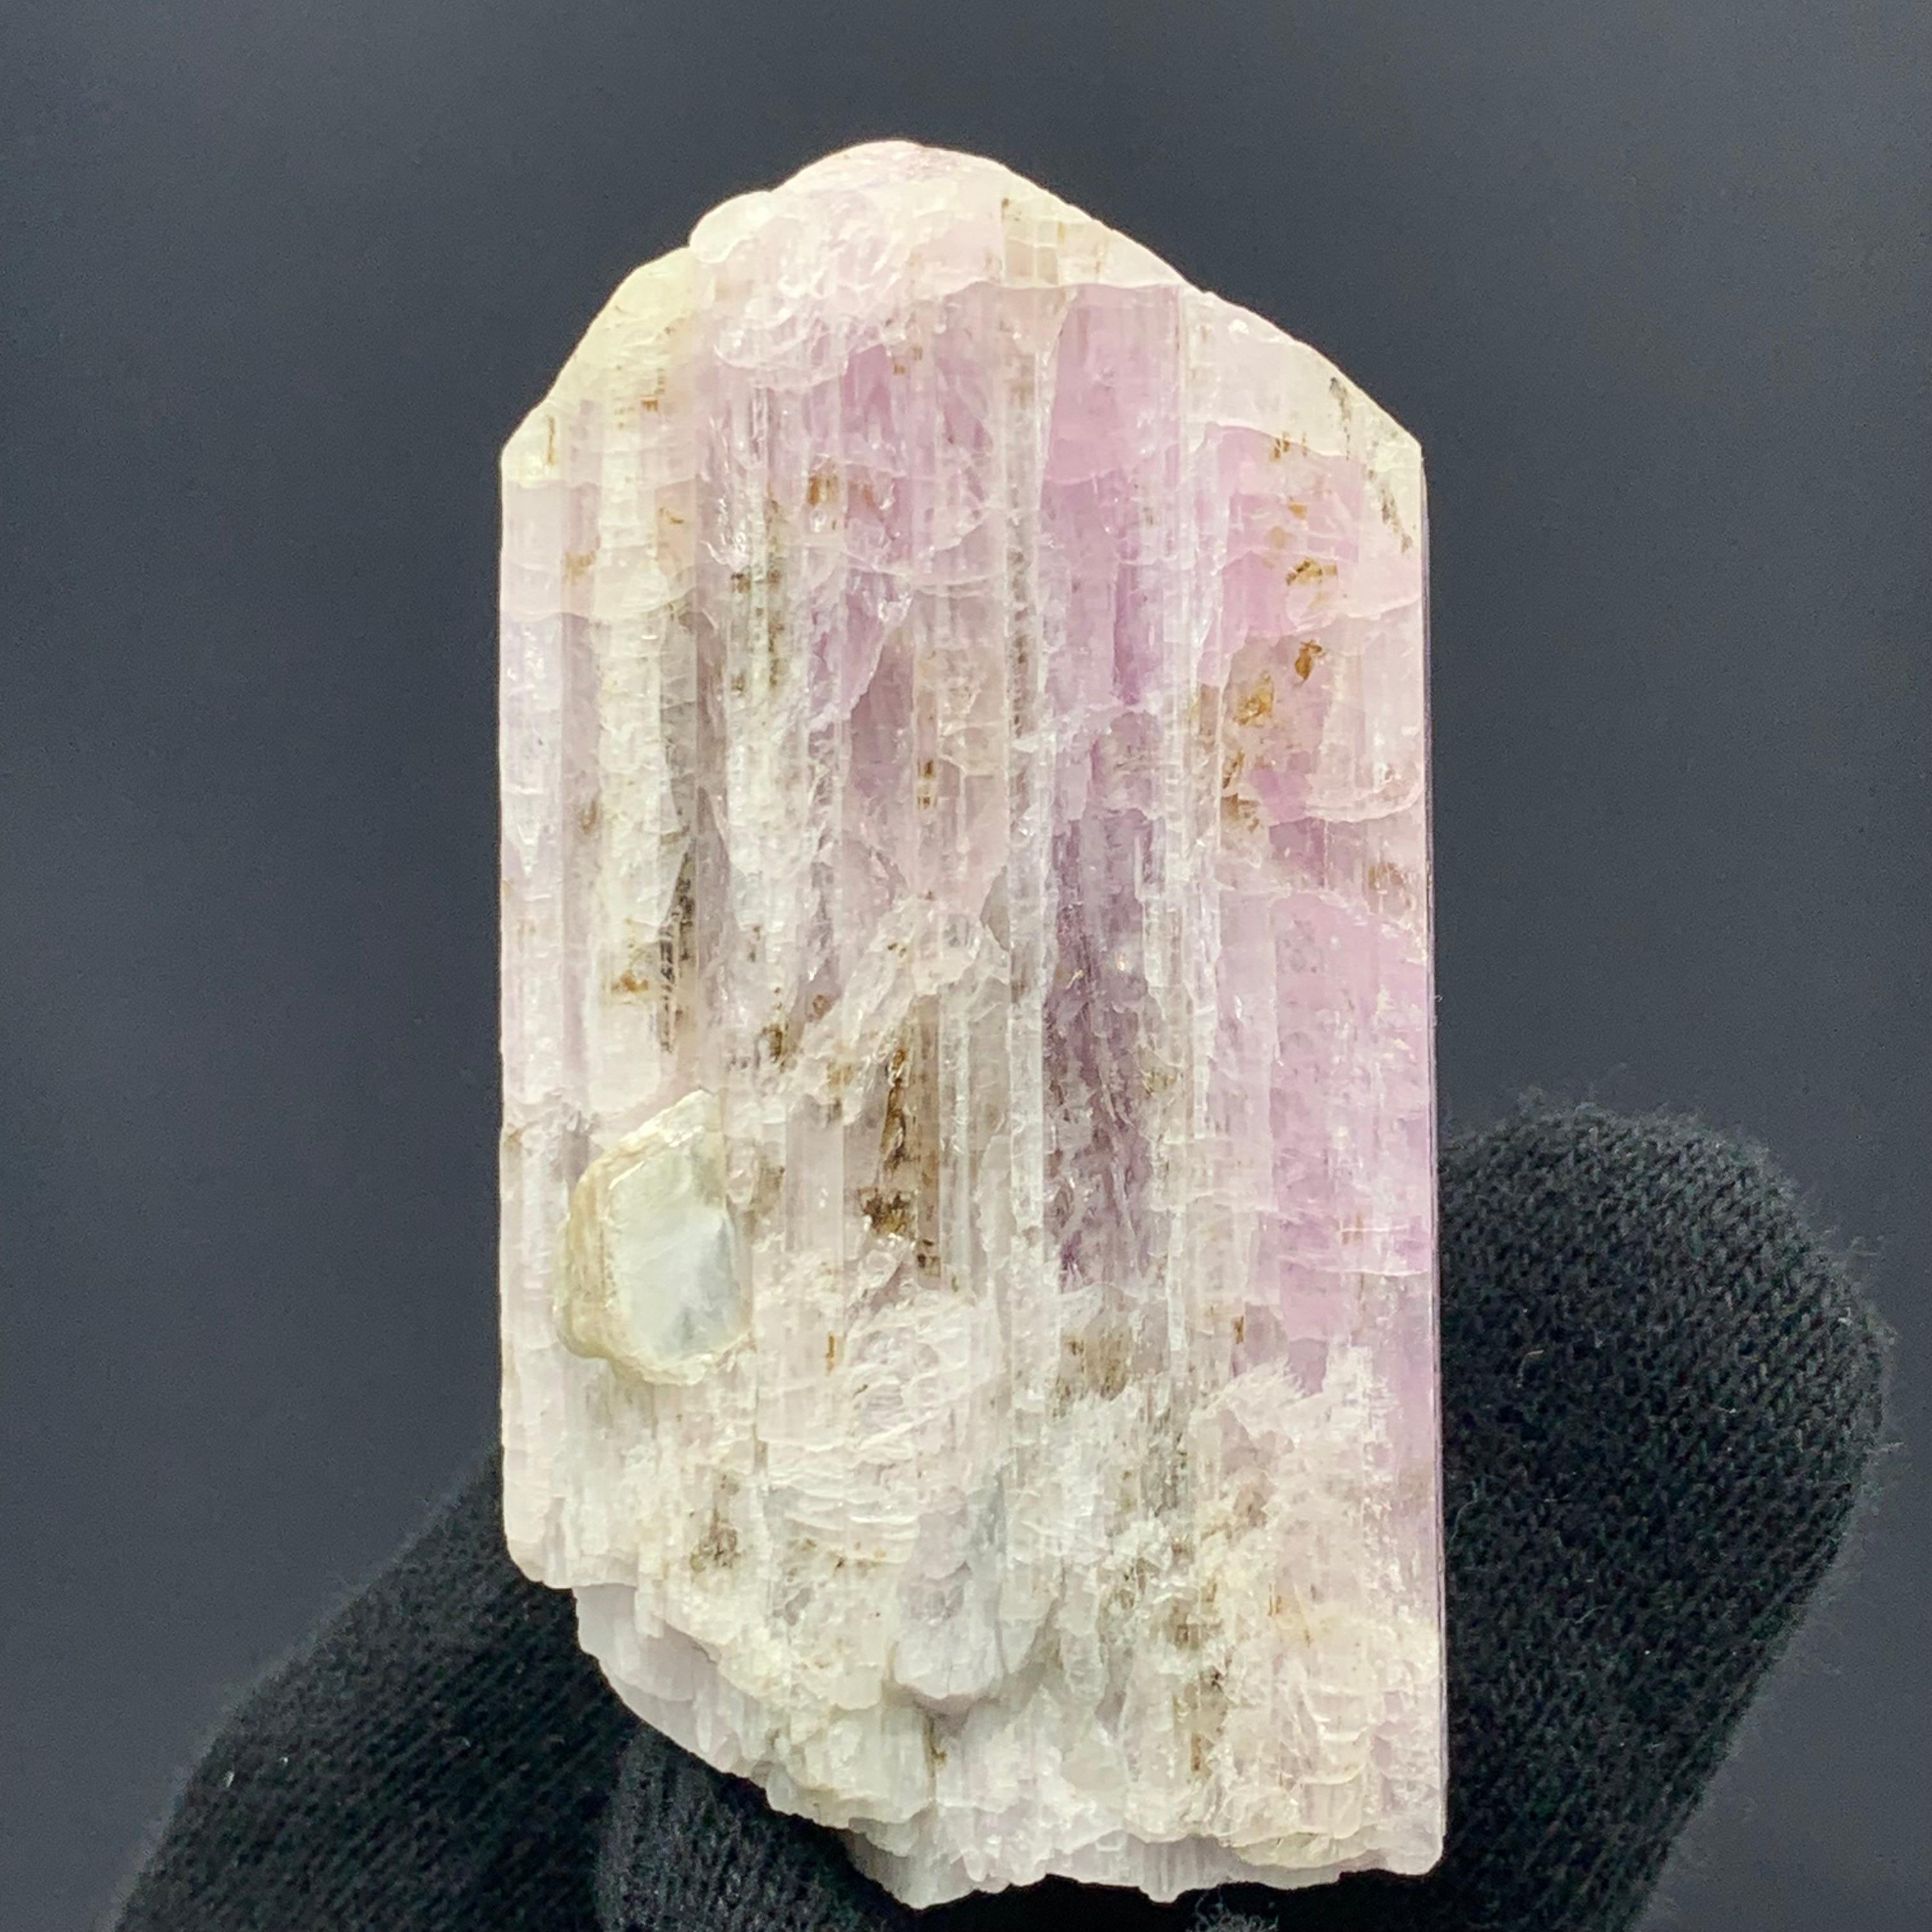 66.90 Gram lovely Kunzite Specimen With Muscovite From Kunar, Afghanistan 
Weight: 66.90 gram
Dimension: 5.9 x 3.2 x 2.5 Cm
Origin: Kunar, Afghanistan 

Kunzite is the best-known variety of the mineral spodumene. It's named after famed gemologist